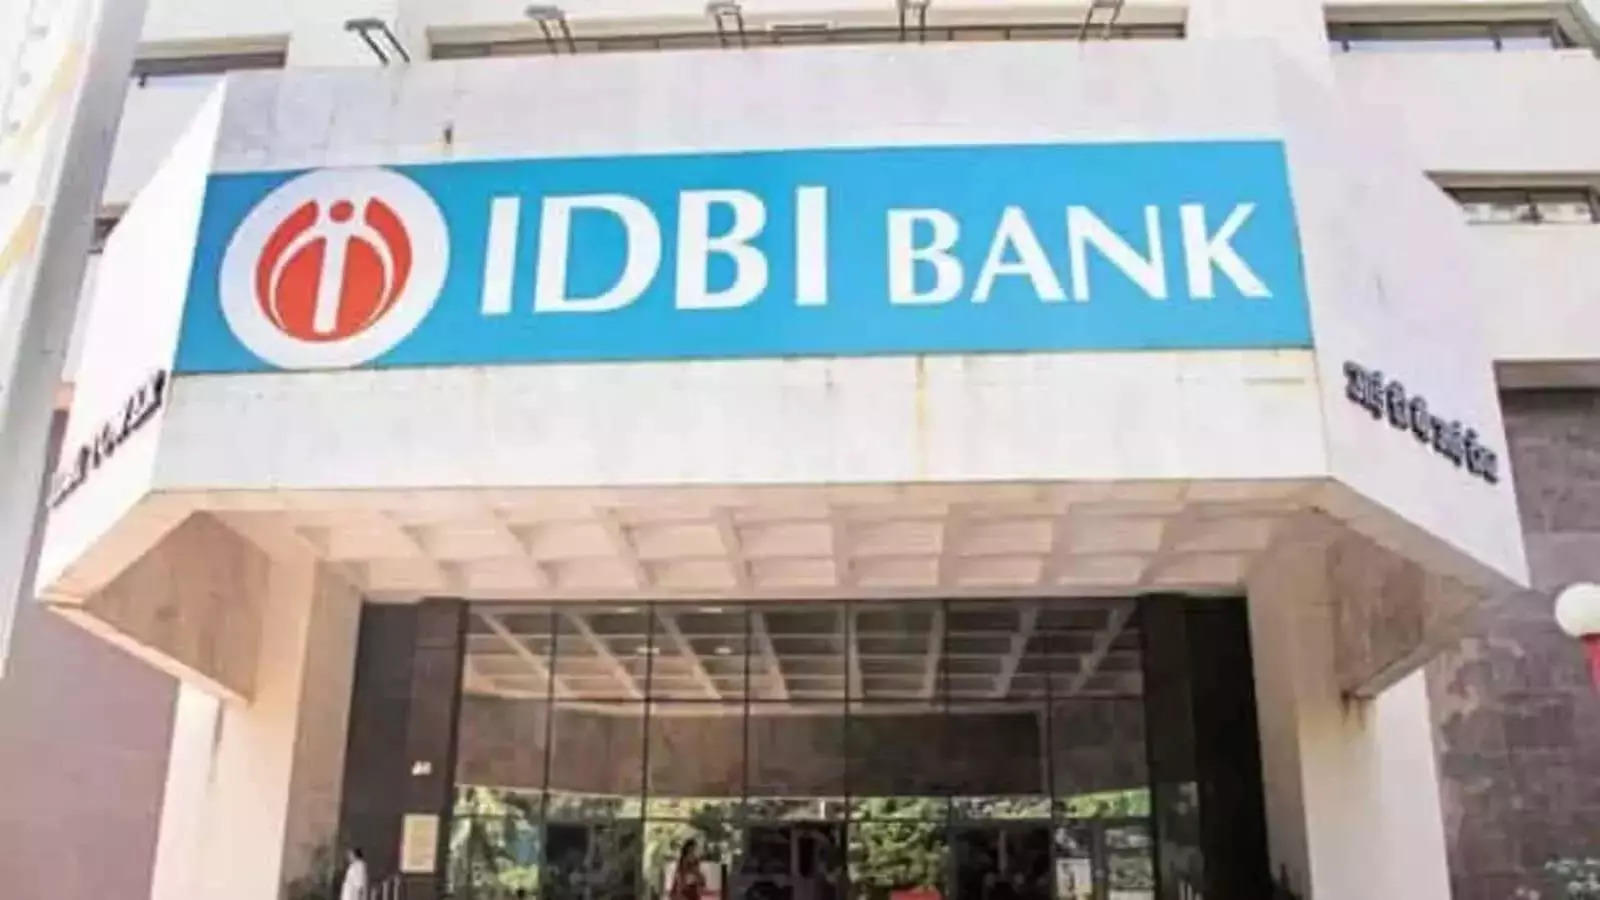 IDBI Bank privatisation picks pace, govt may allow access to private data by early August: DIPAM Secy 